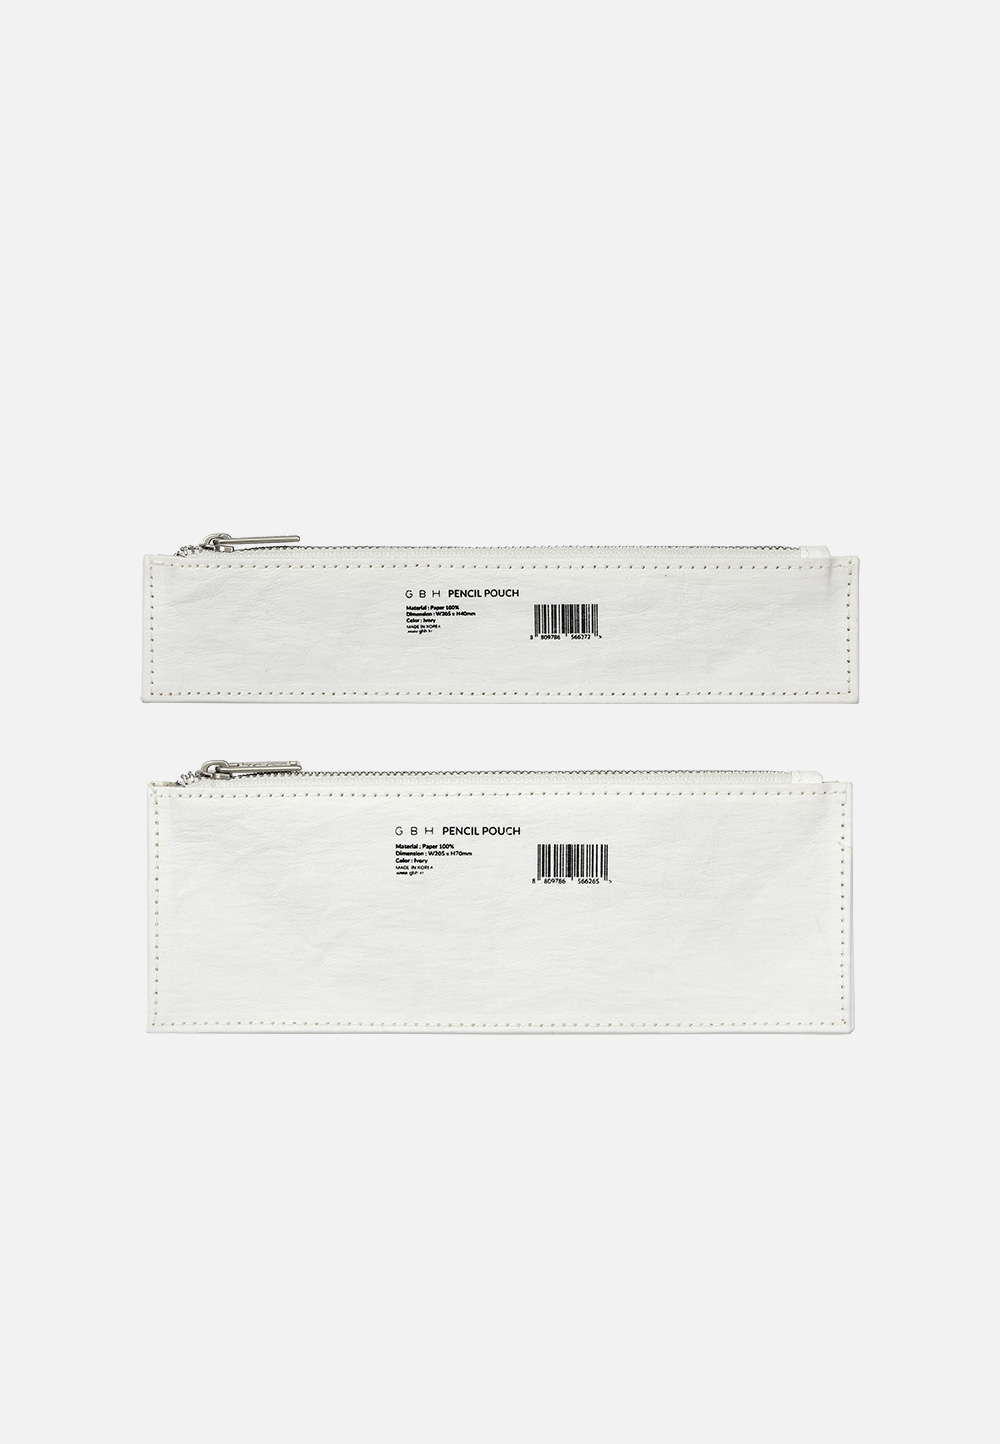 PENCIL POUCH  IVORY  (2 SIZE)